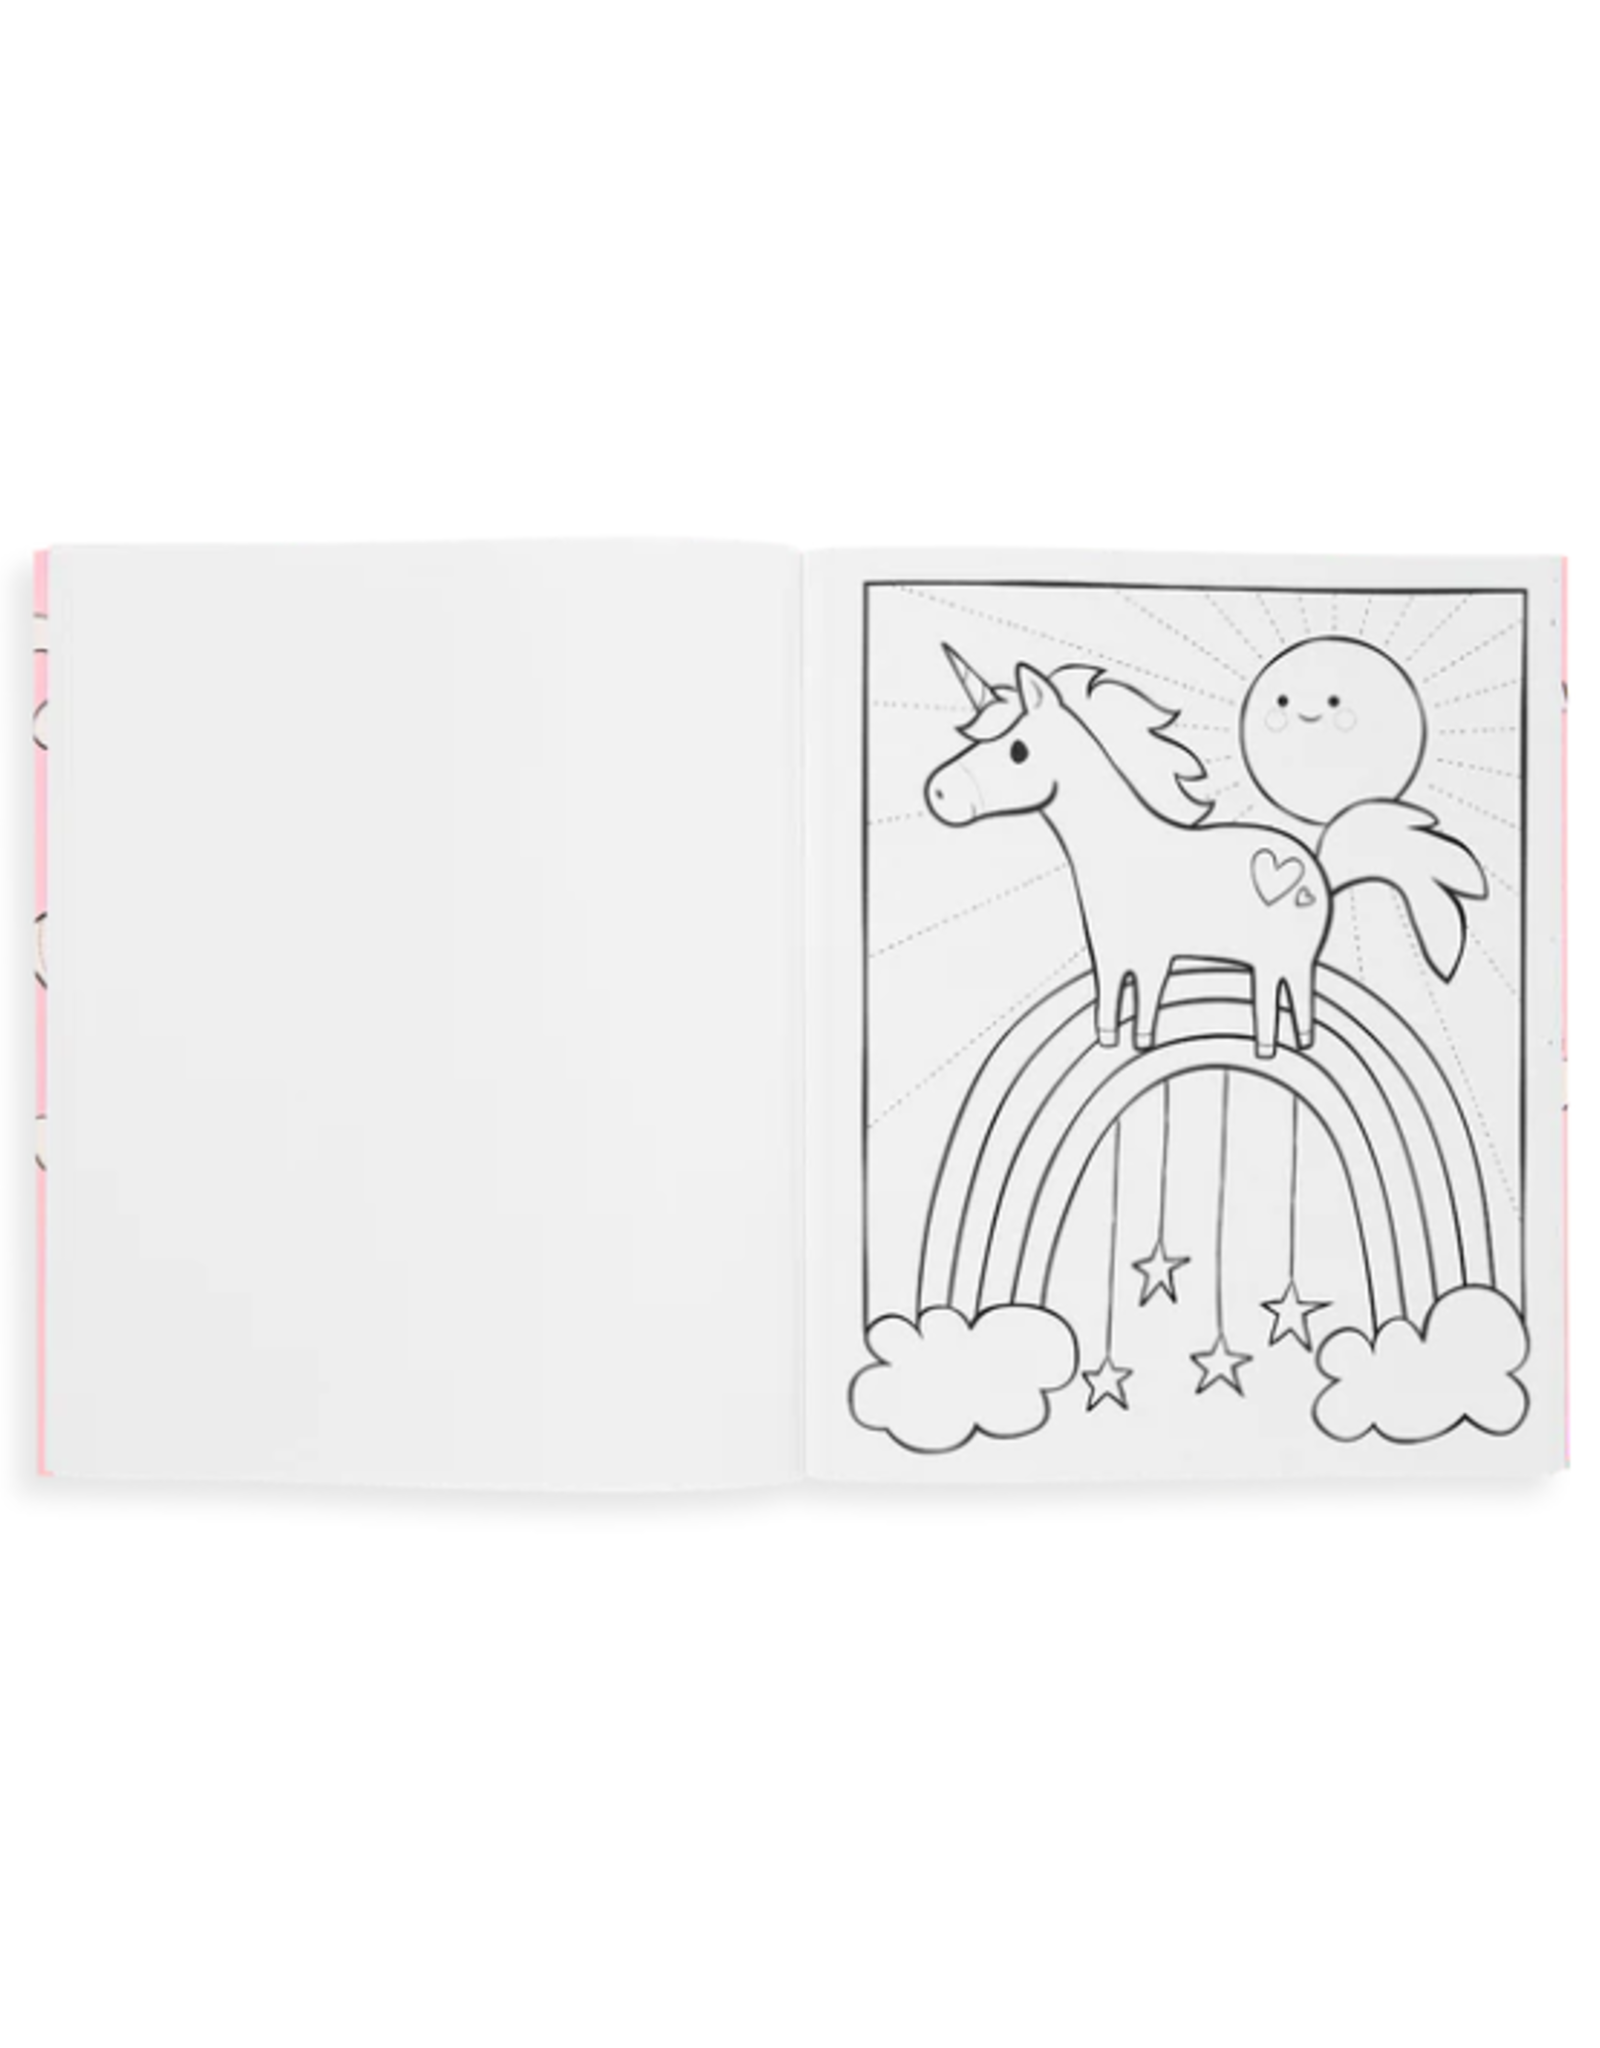 Ooly Ooly - Color-In' Book Enchanting Unicorns